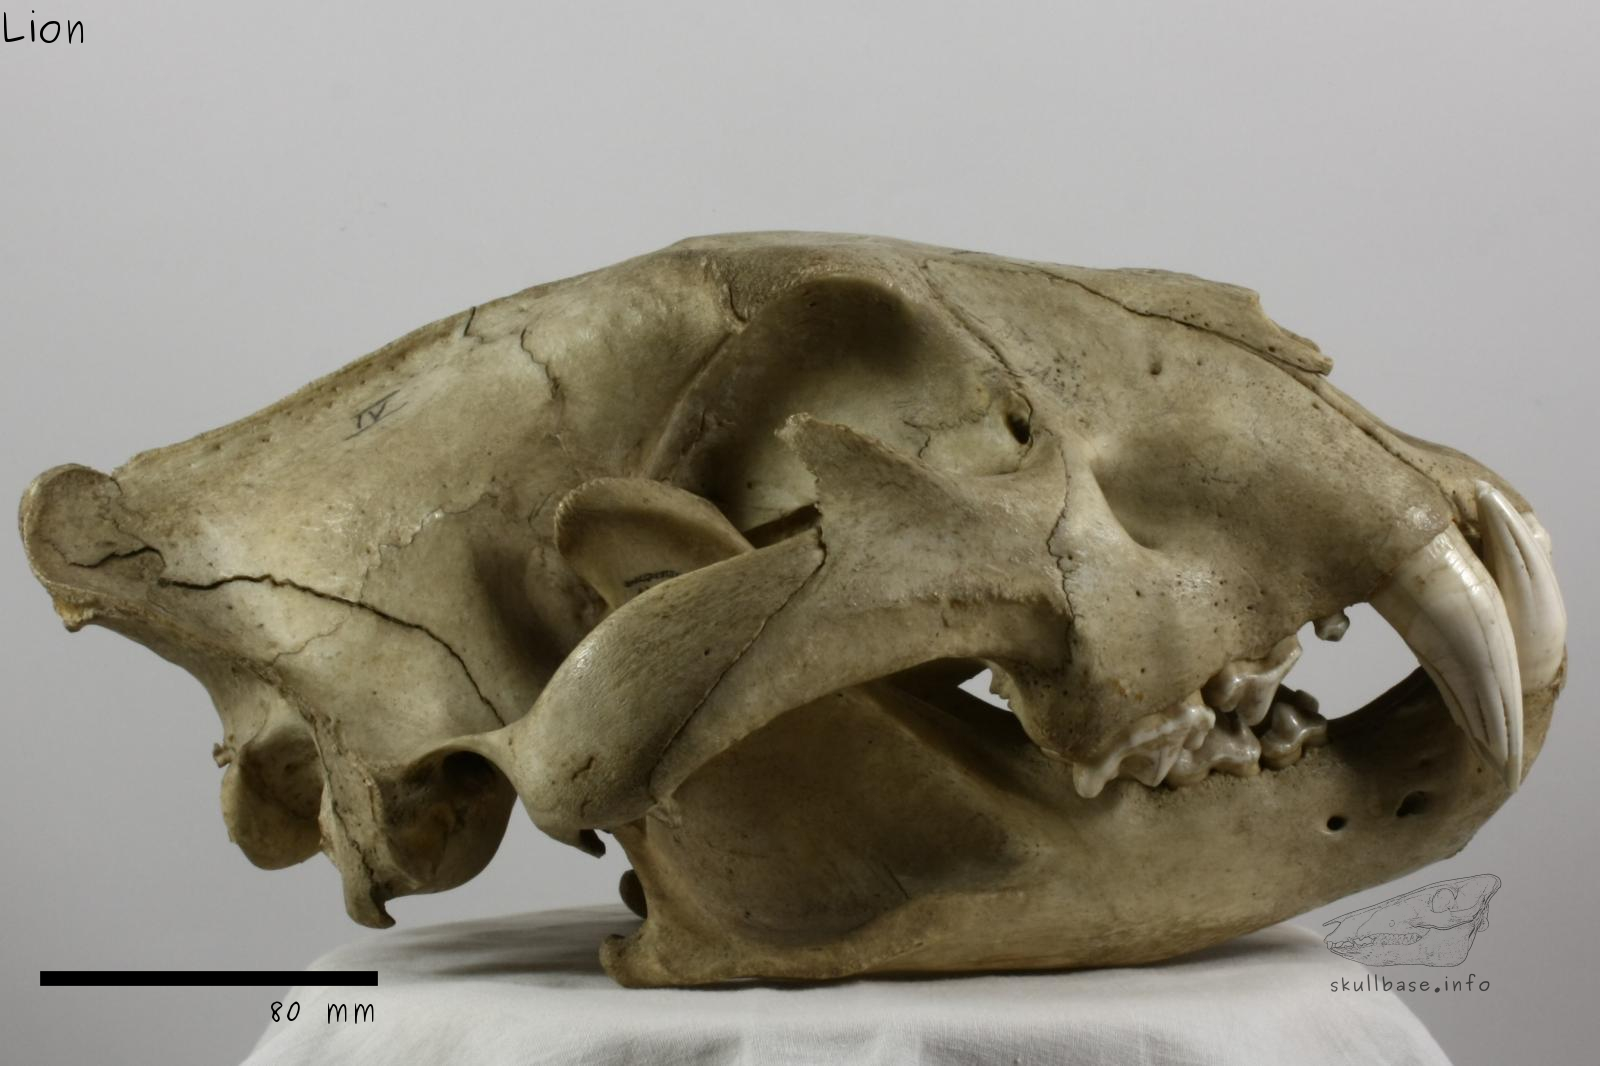 Lion (Panthera leo) skull lateral view